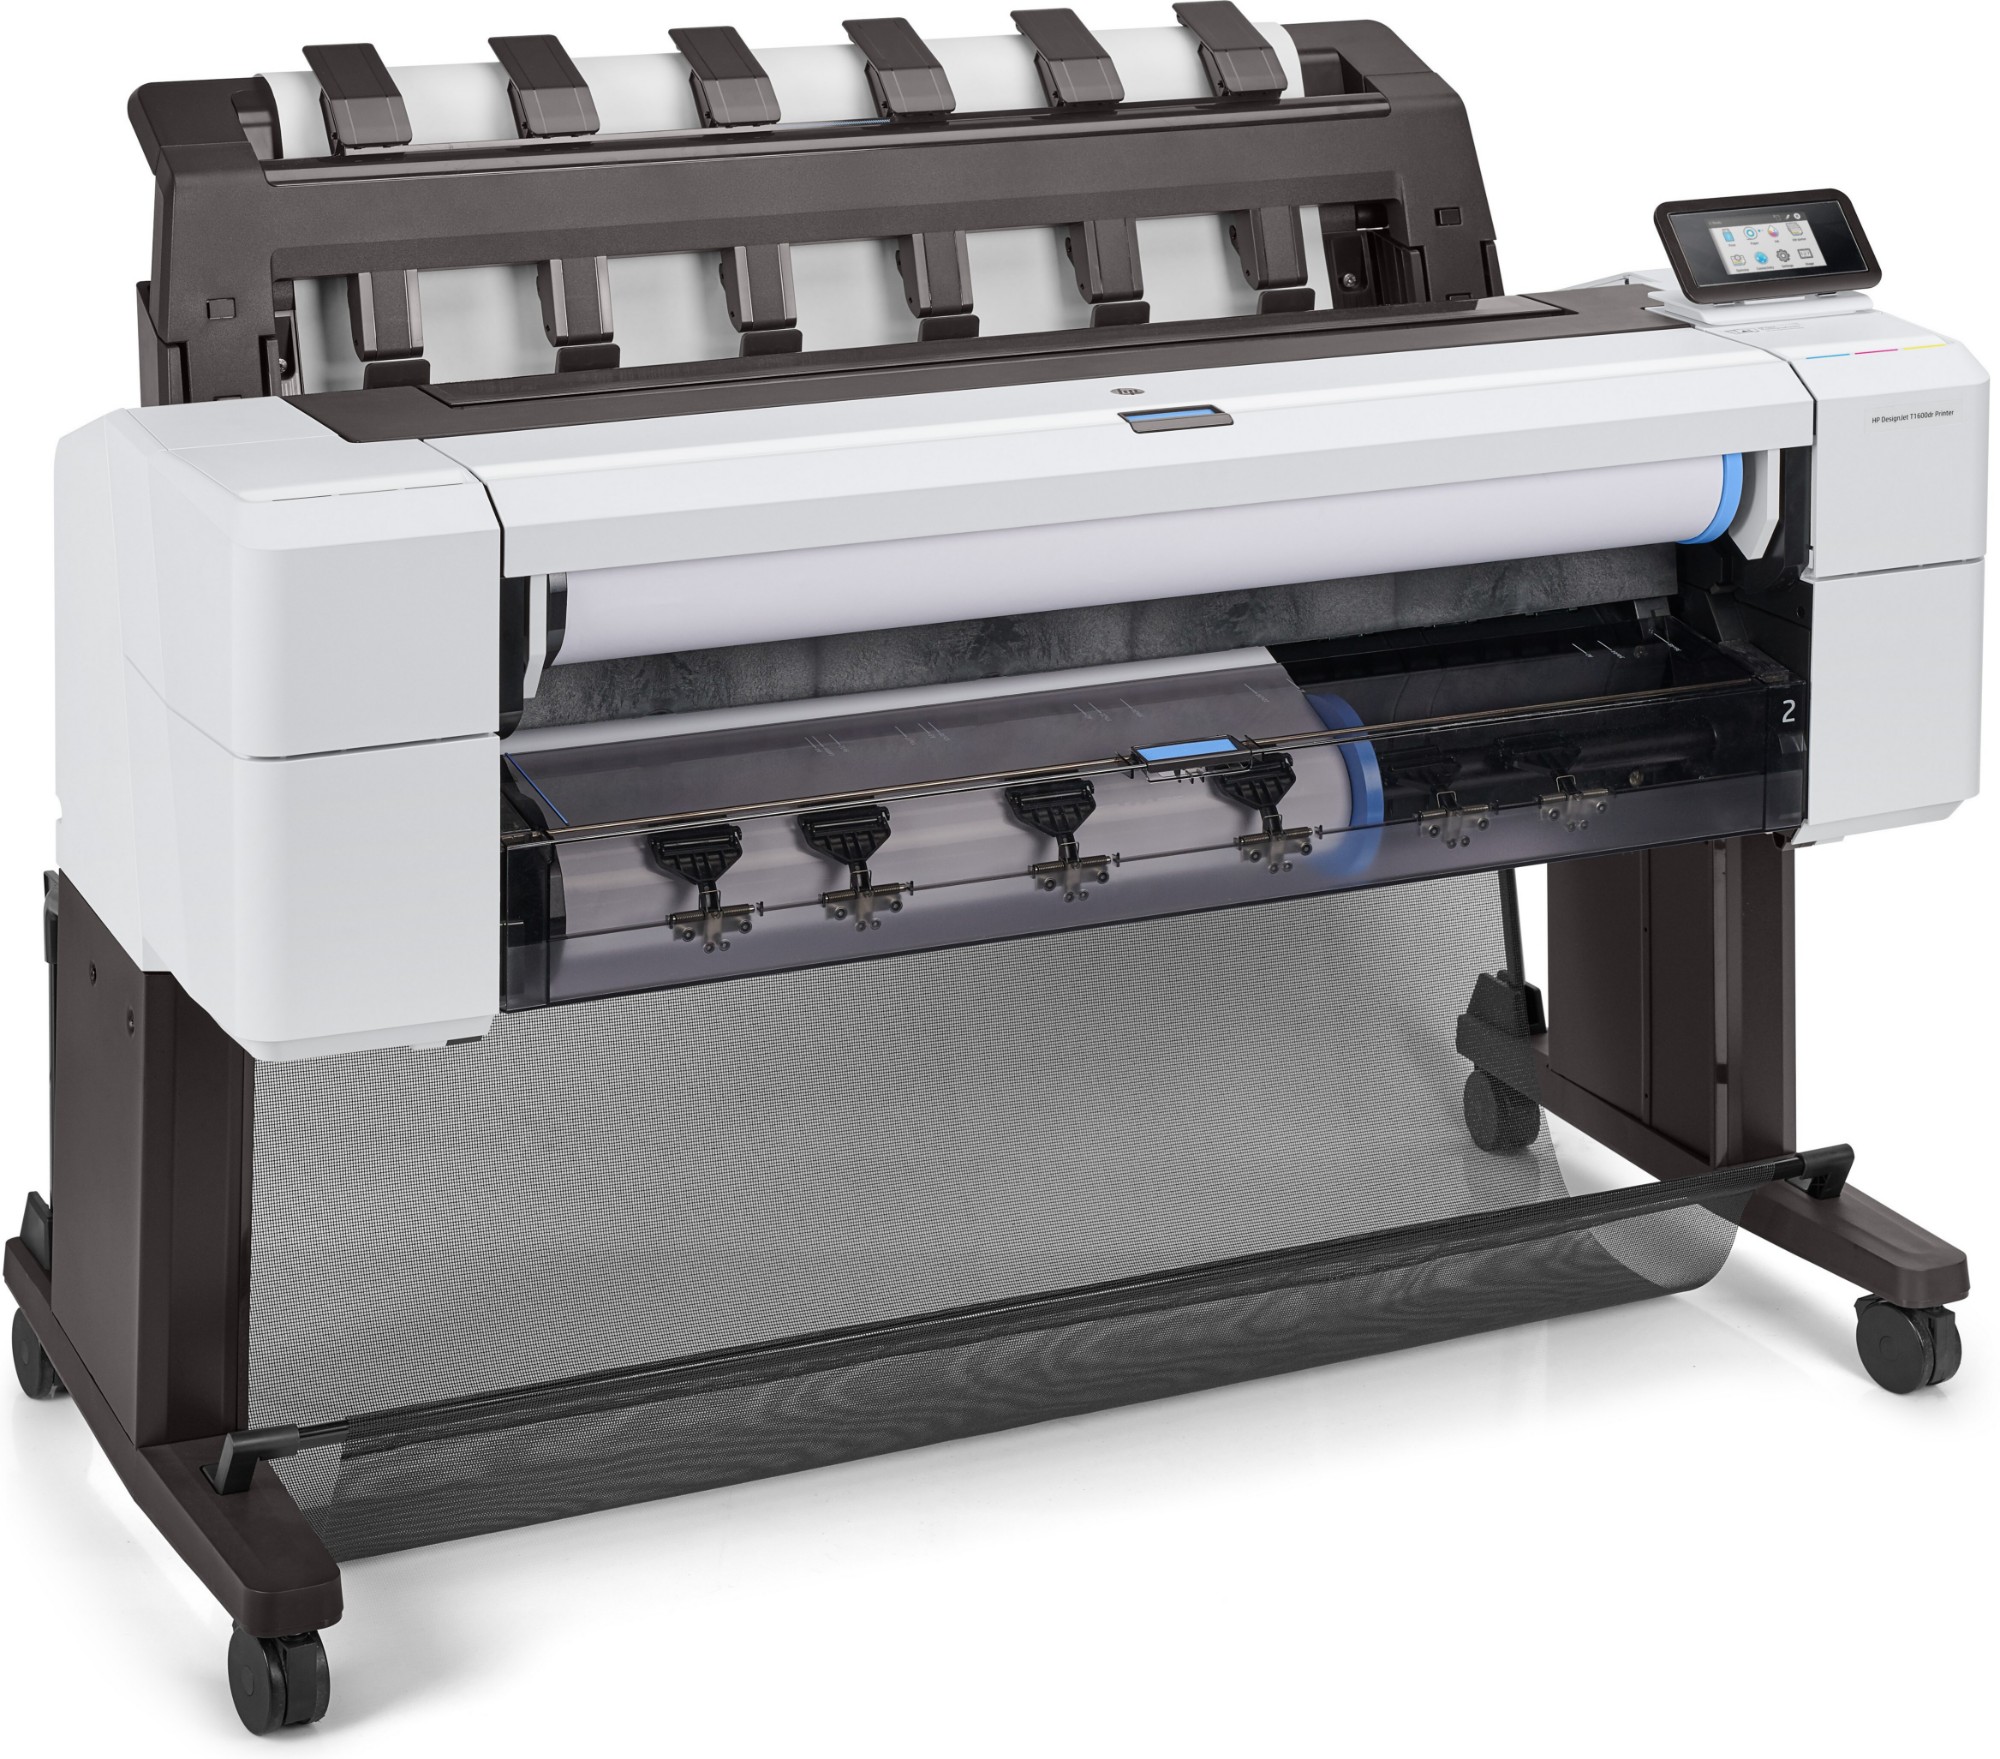 Gehakt Nuttig solidariteit HP Designjet T1600dr large format printer Thermal inkjet Colour 2400 x 1200  DPI A0 (841 x 1189 mm) Ethernet LAN, 1 in distributor/wholesale stock for  resellers to sell - Stock In The Channel